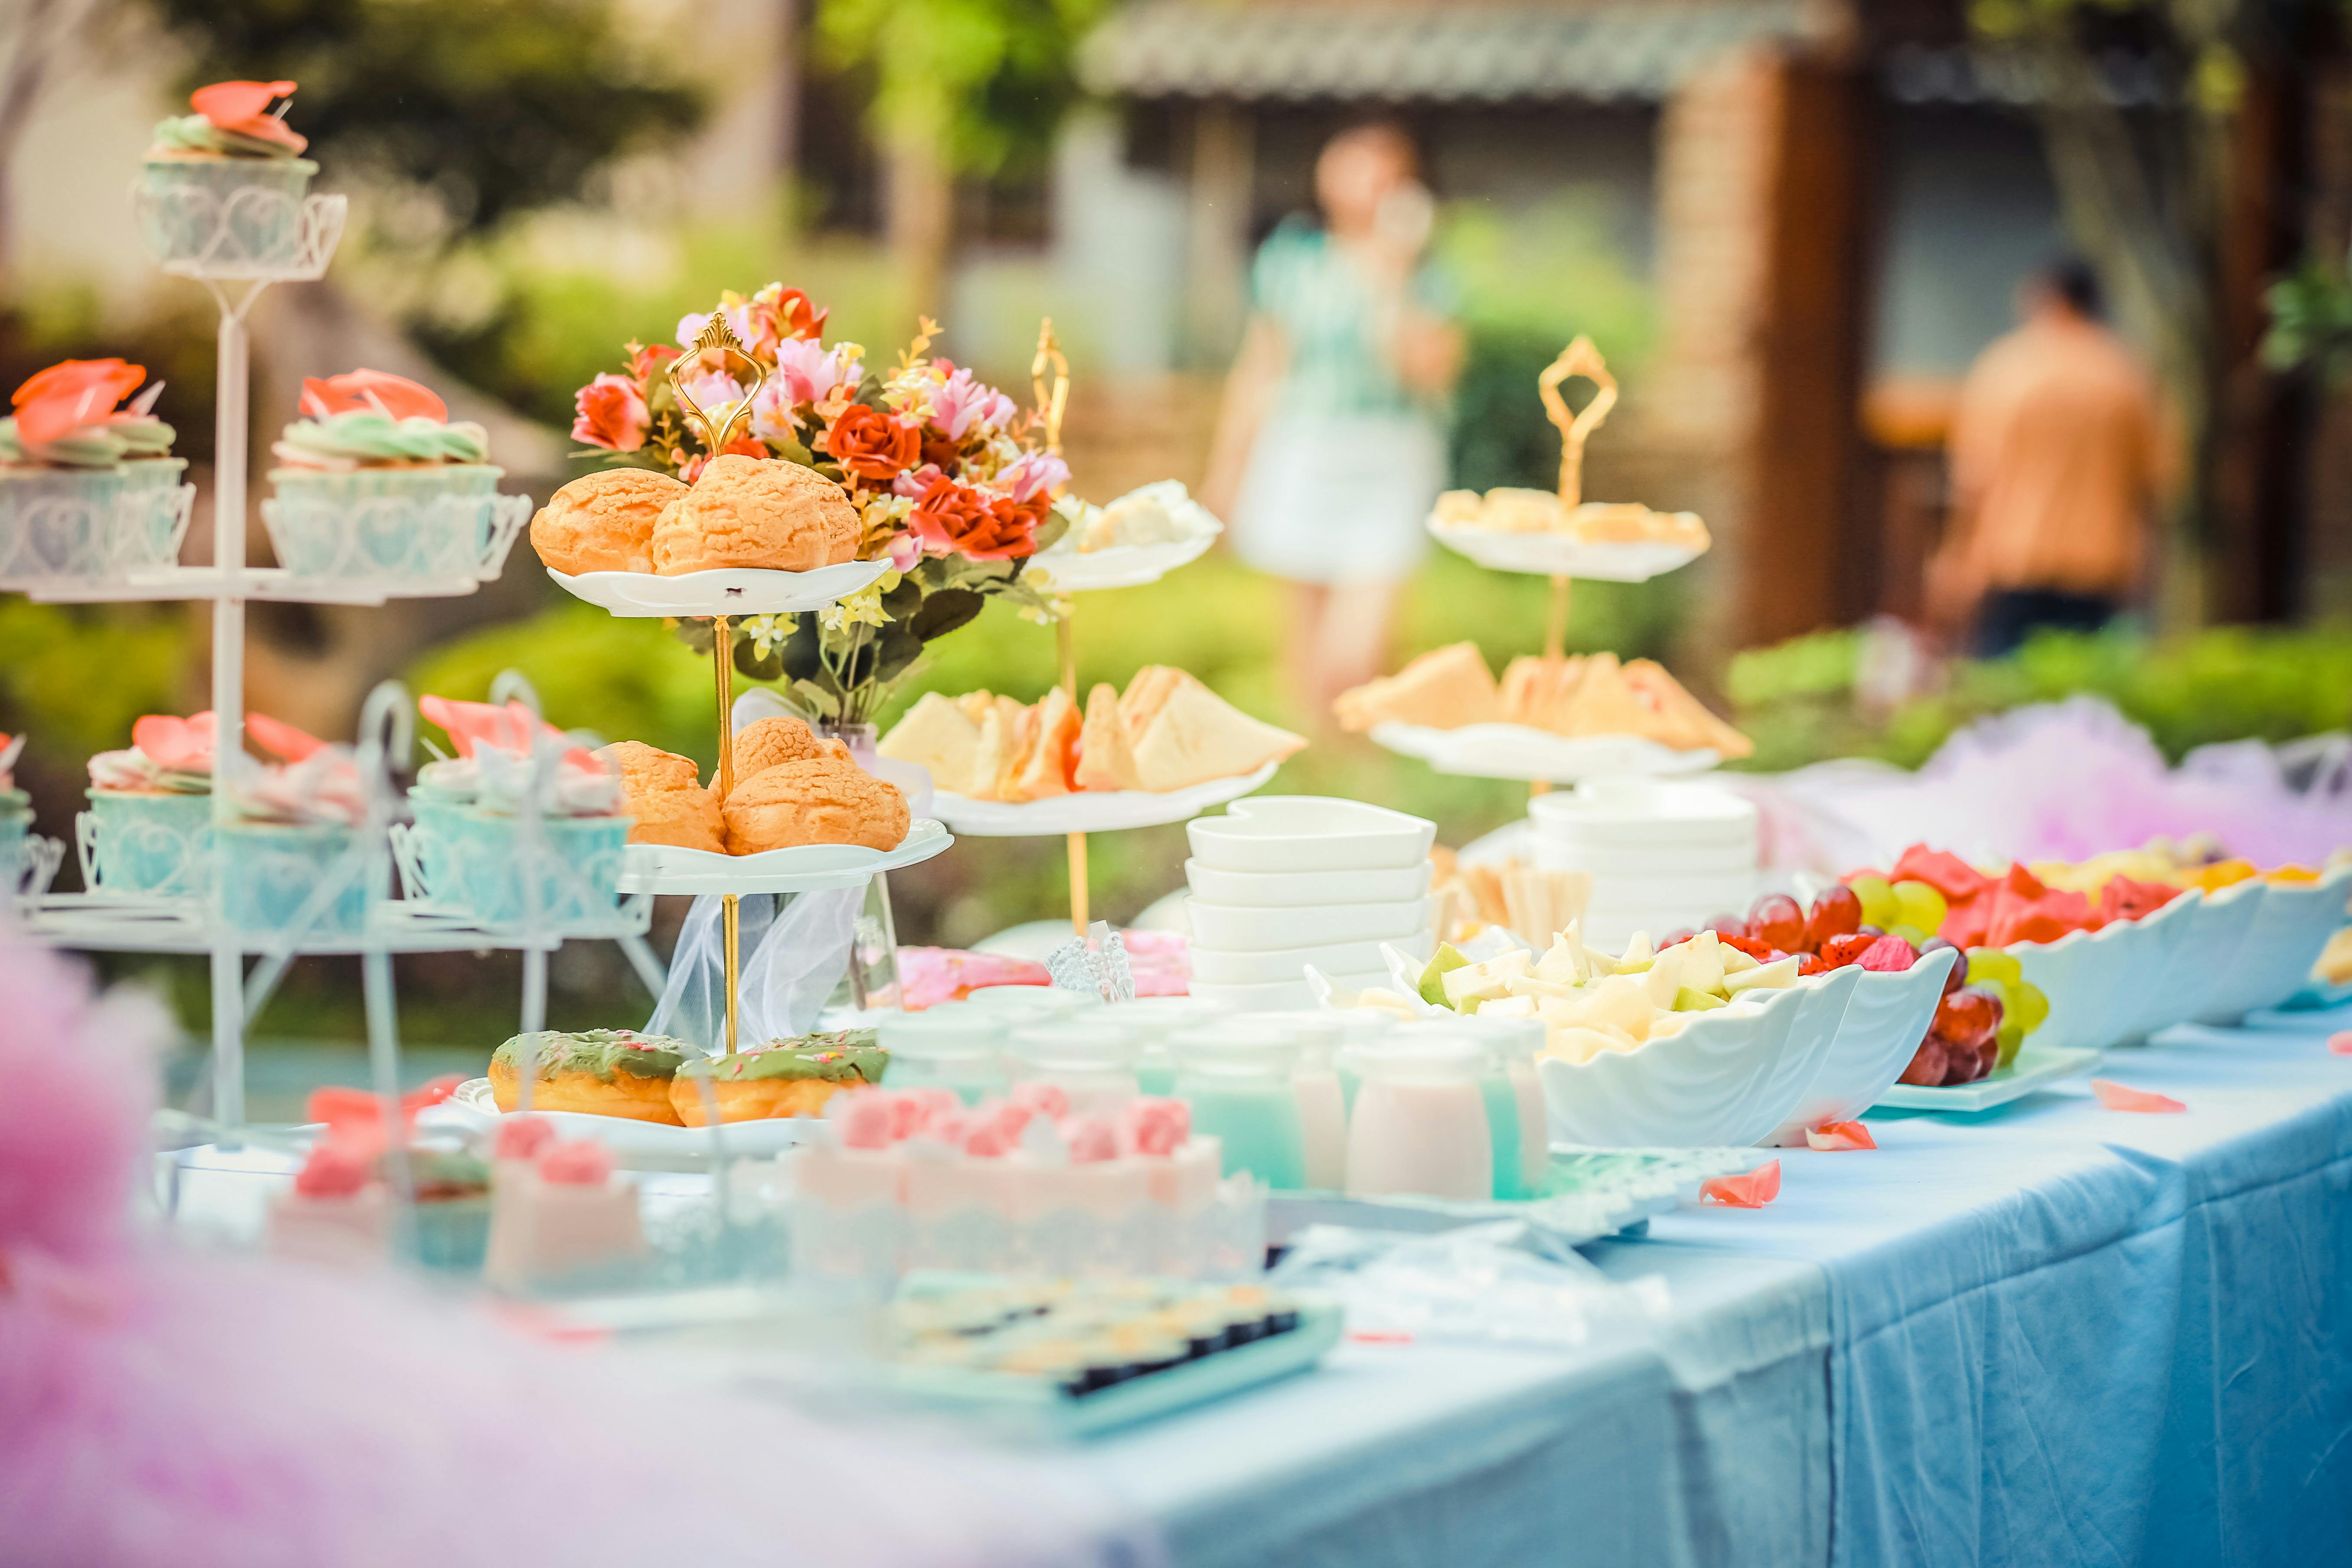 Catered pastries at a house warming party | Source: Pexels